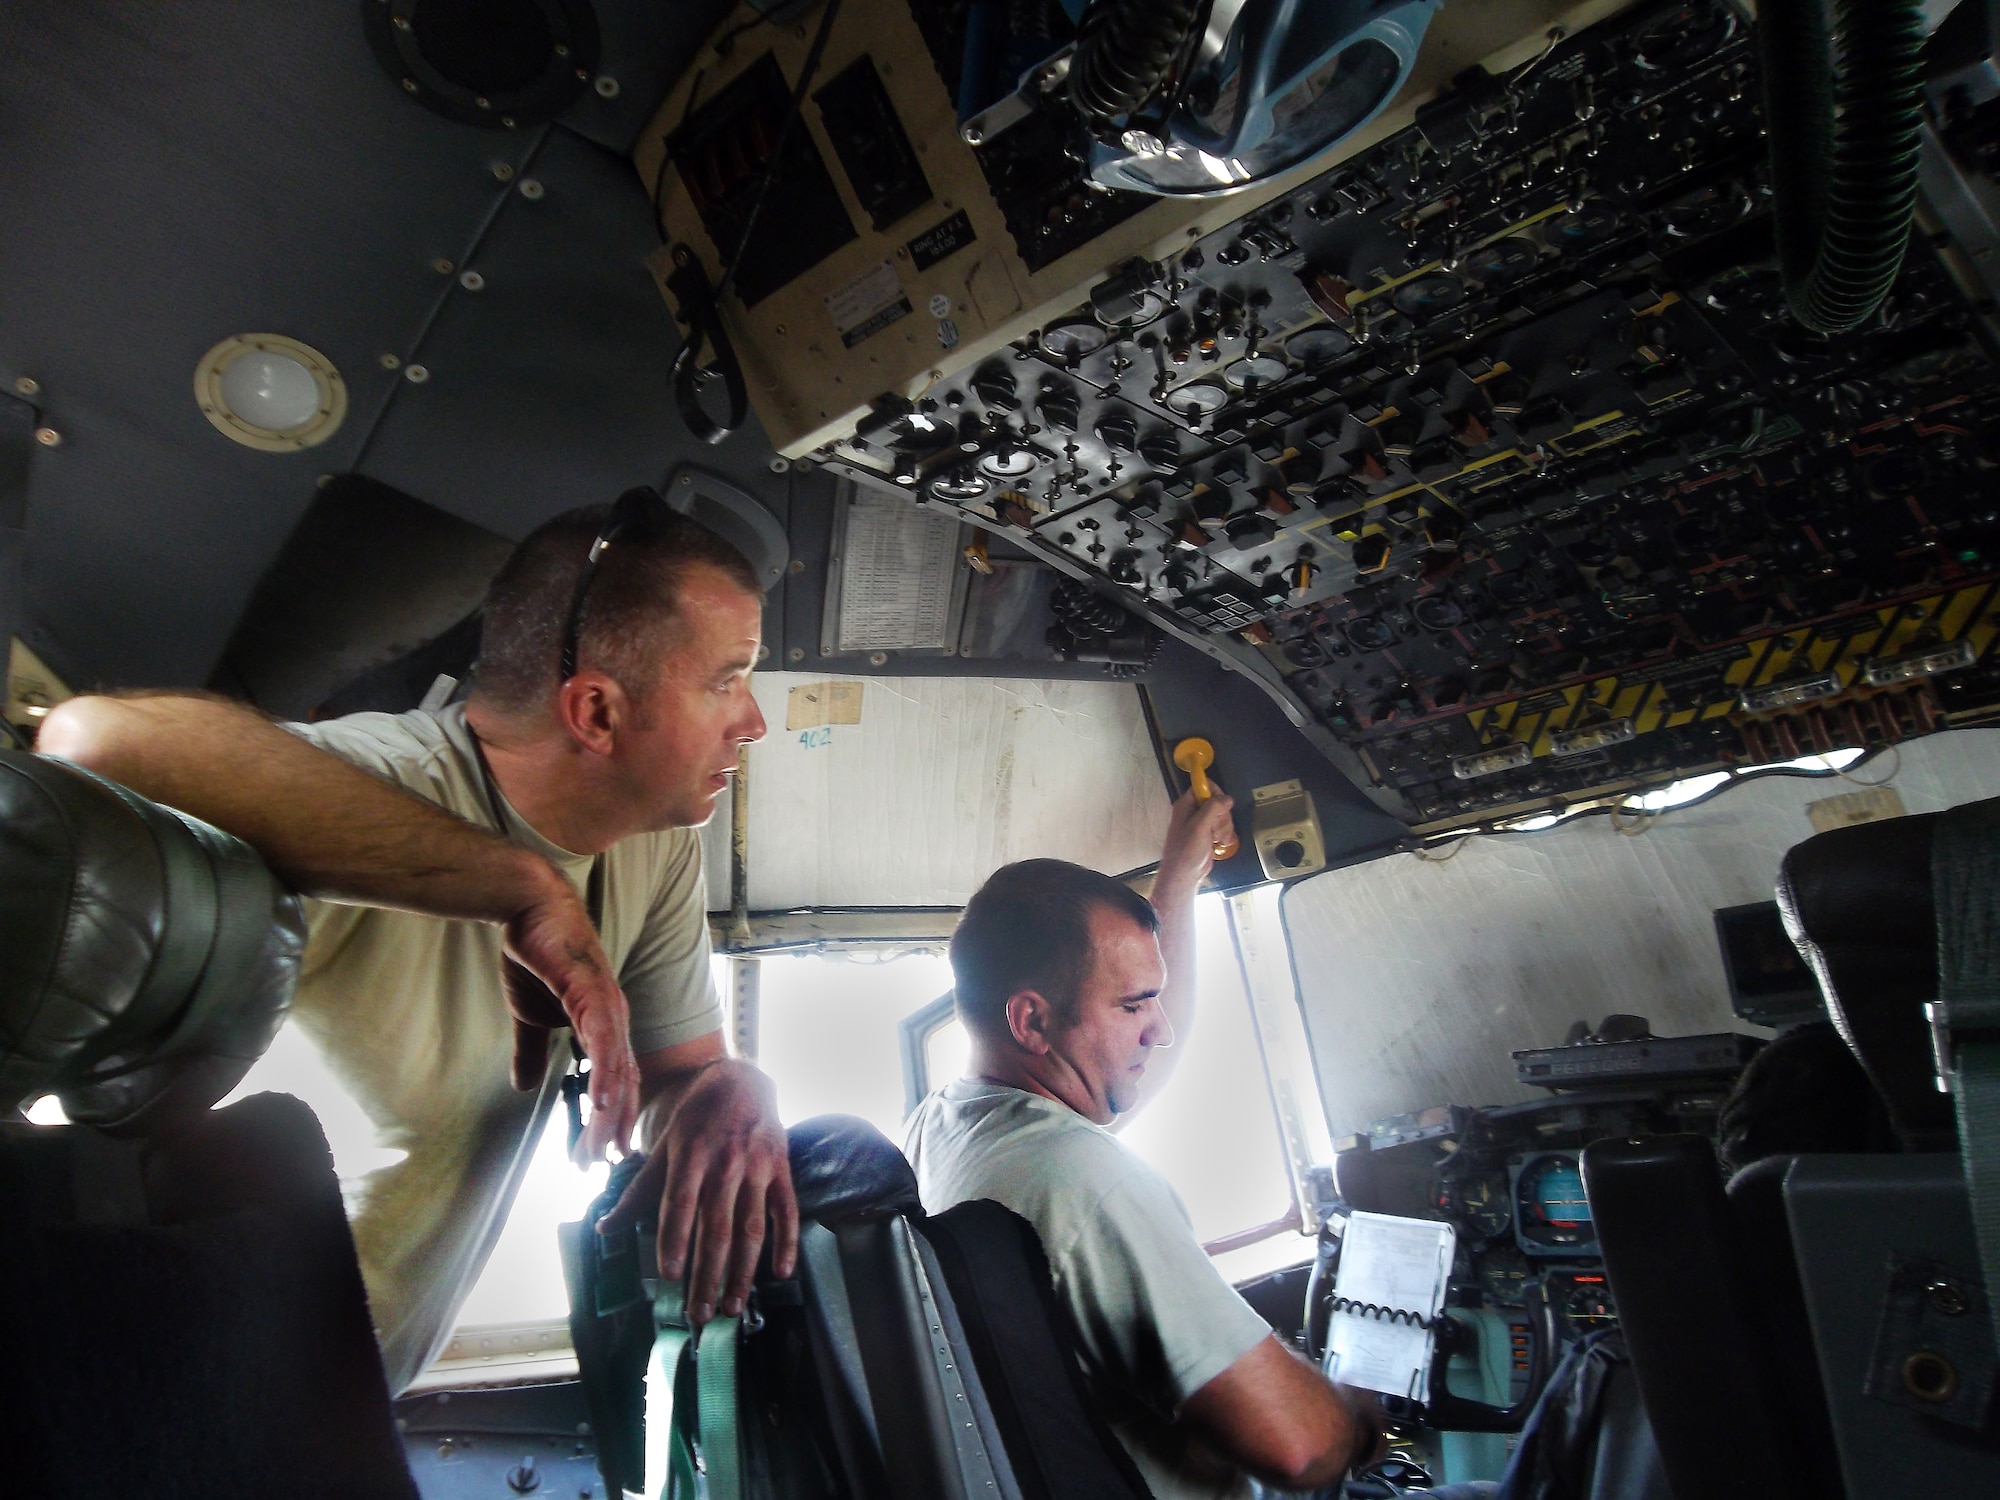 Senior Master Sgt. Marshal Sims and Tech. Sgt. Rory Lapres troubleshoot a flight deck.